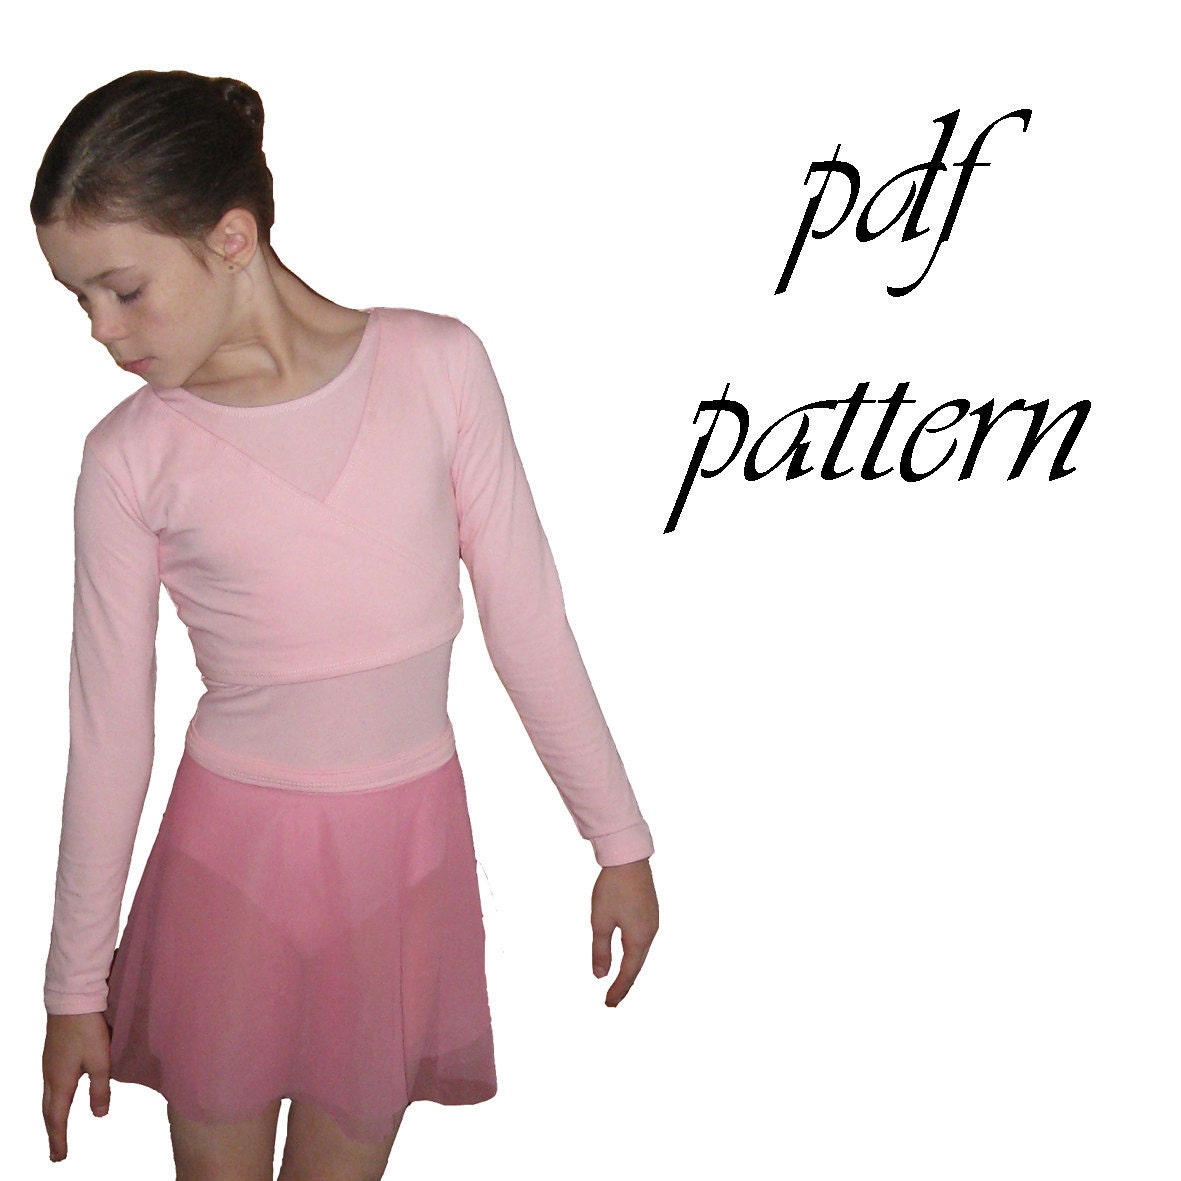 Ravelry: Crossover Top pattern by Patons - Ravelry - a knit and